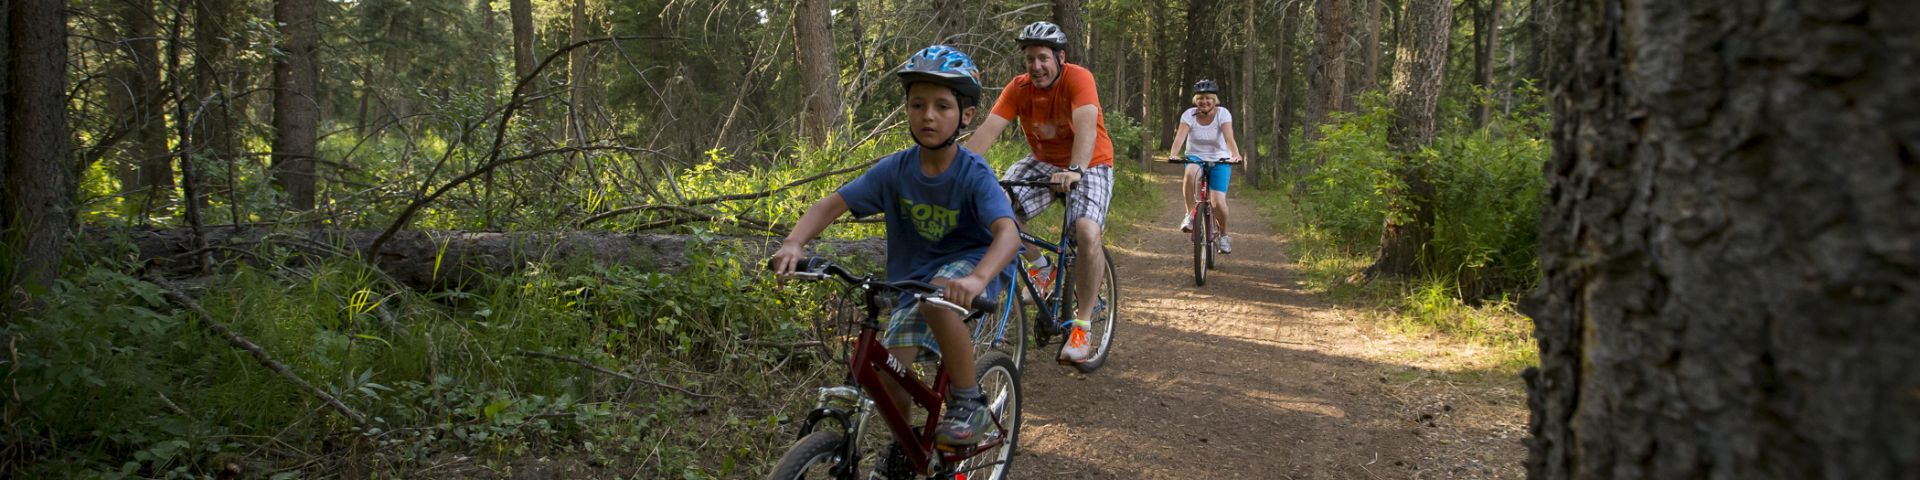  A family biking along one of the backcountry trails in the Cypress Hills at Fort Walsh National Historic Site.